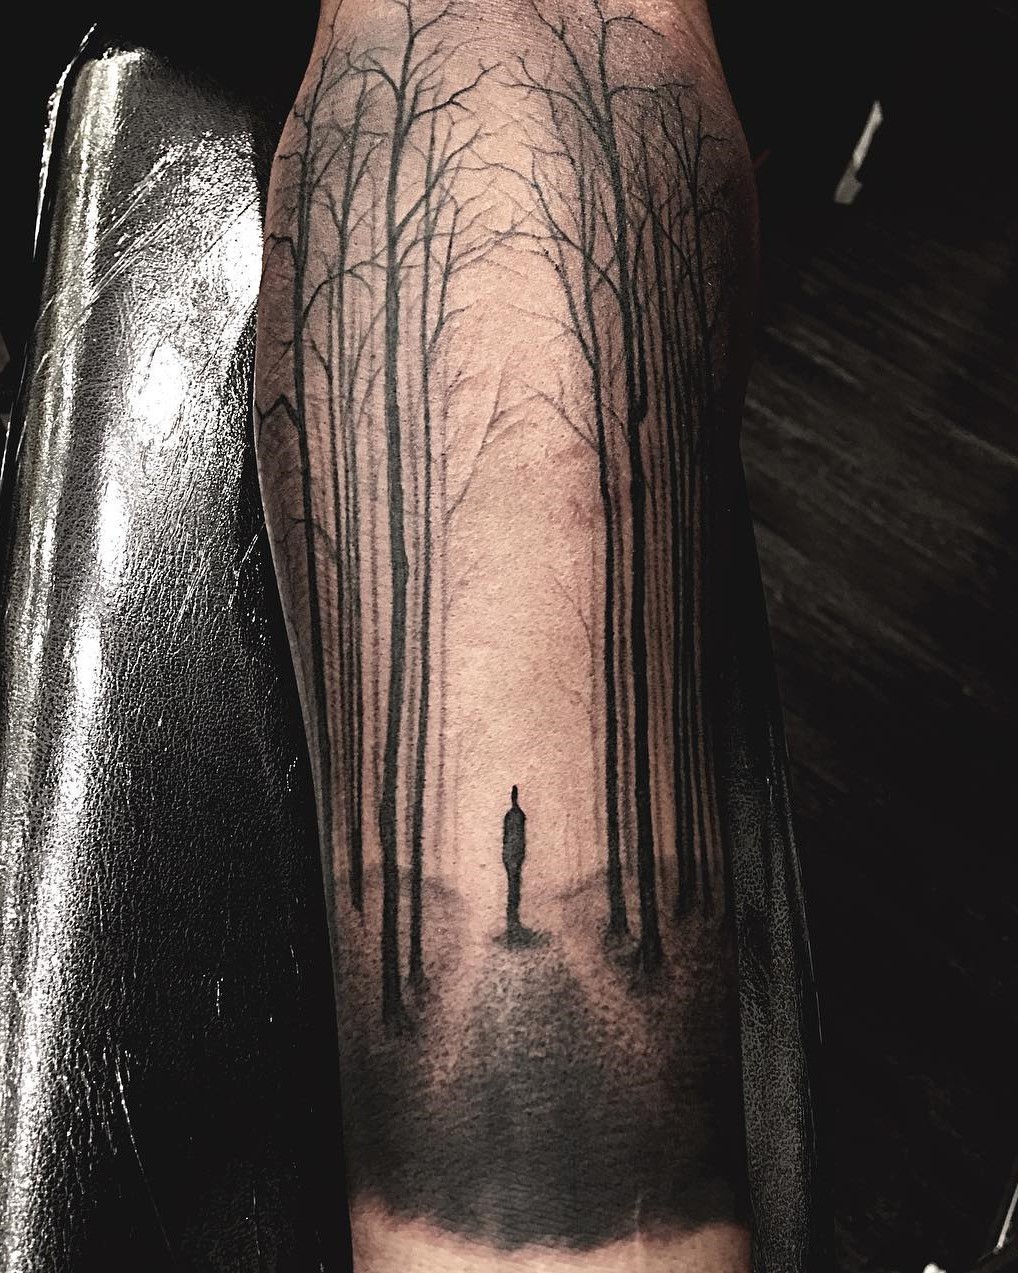 Shadow of a Person standing in the light of a forest black and grey tattoo done by Tattoo Artist Alan Lott at Sacred Mandala Studio in Durham, NC.